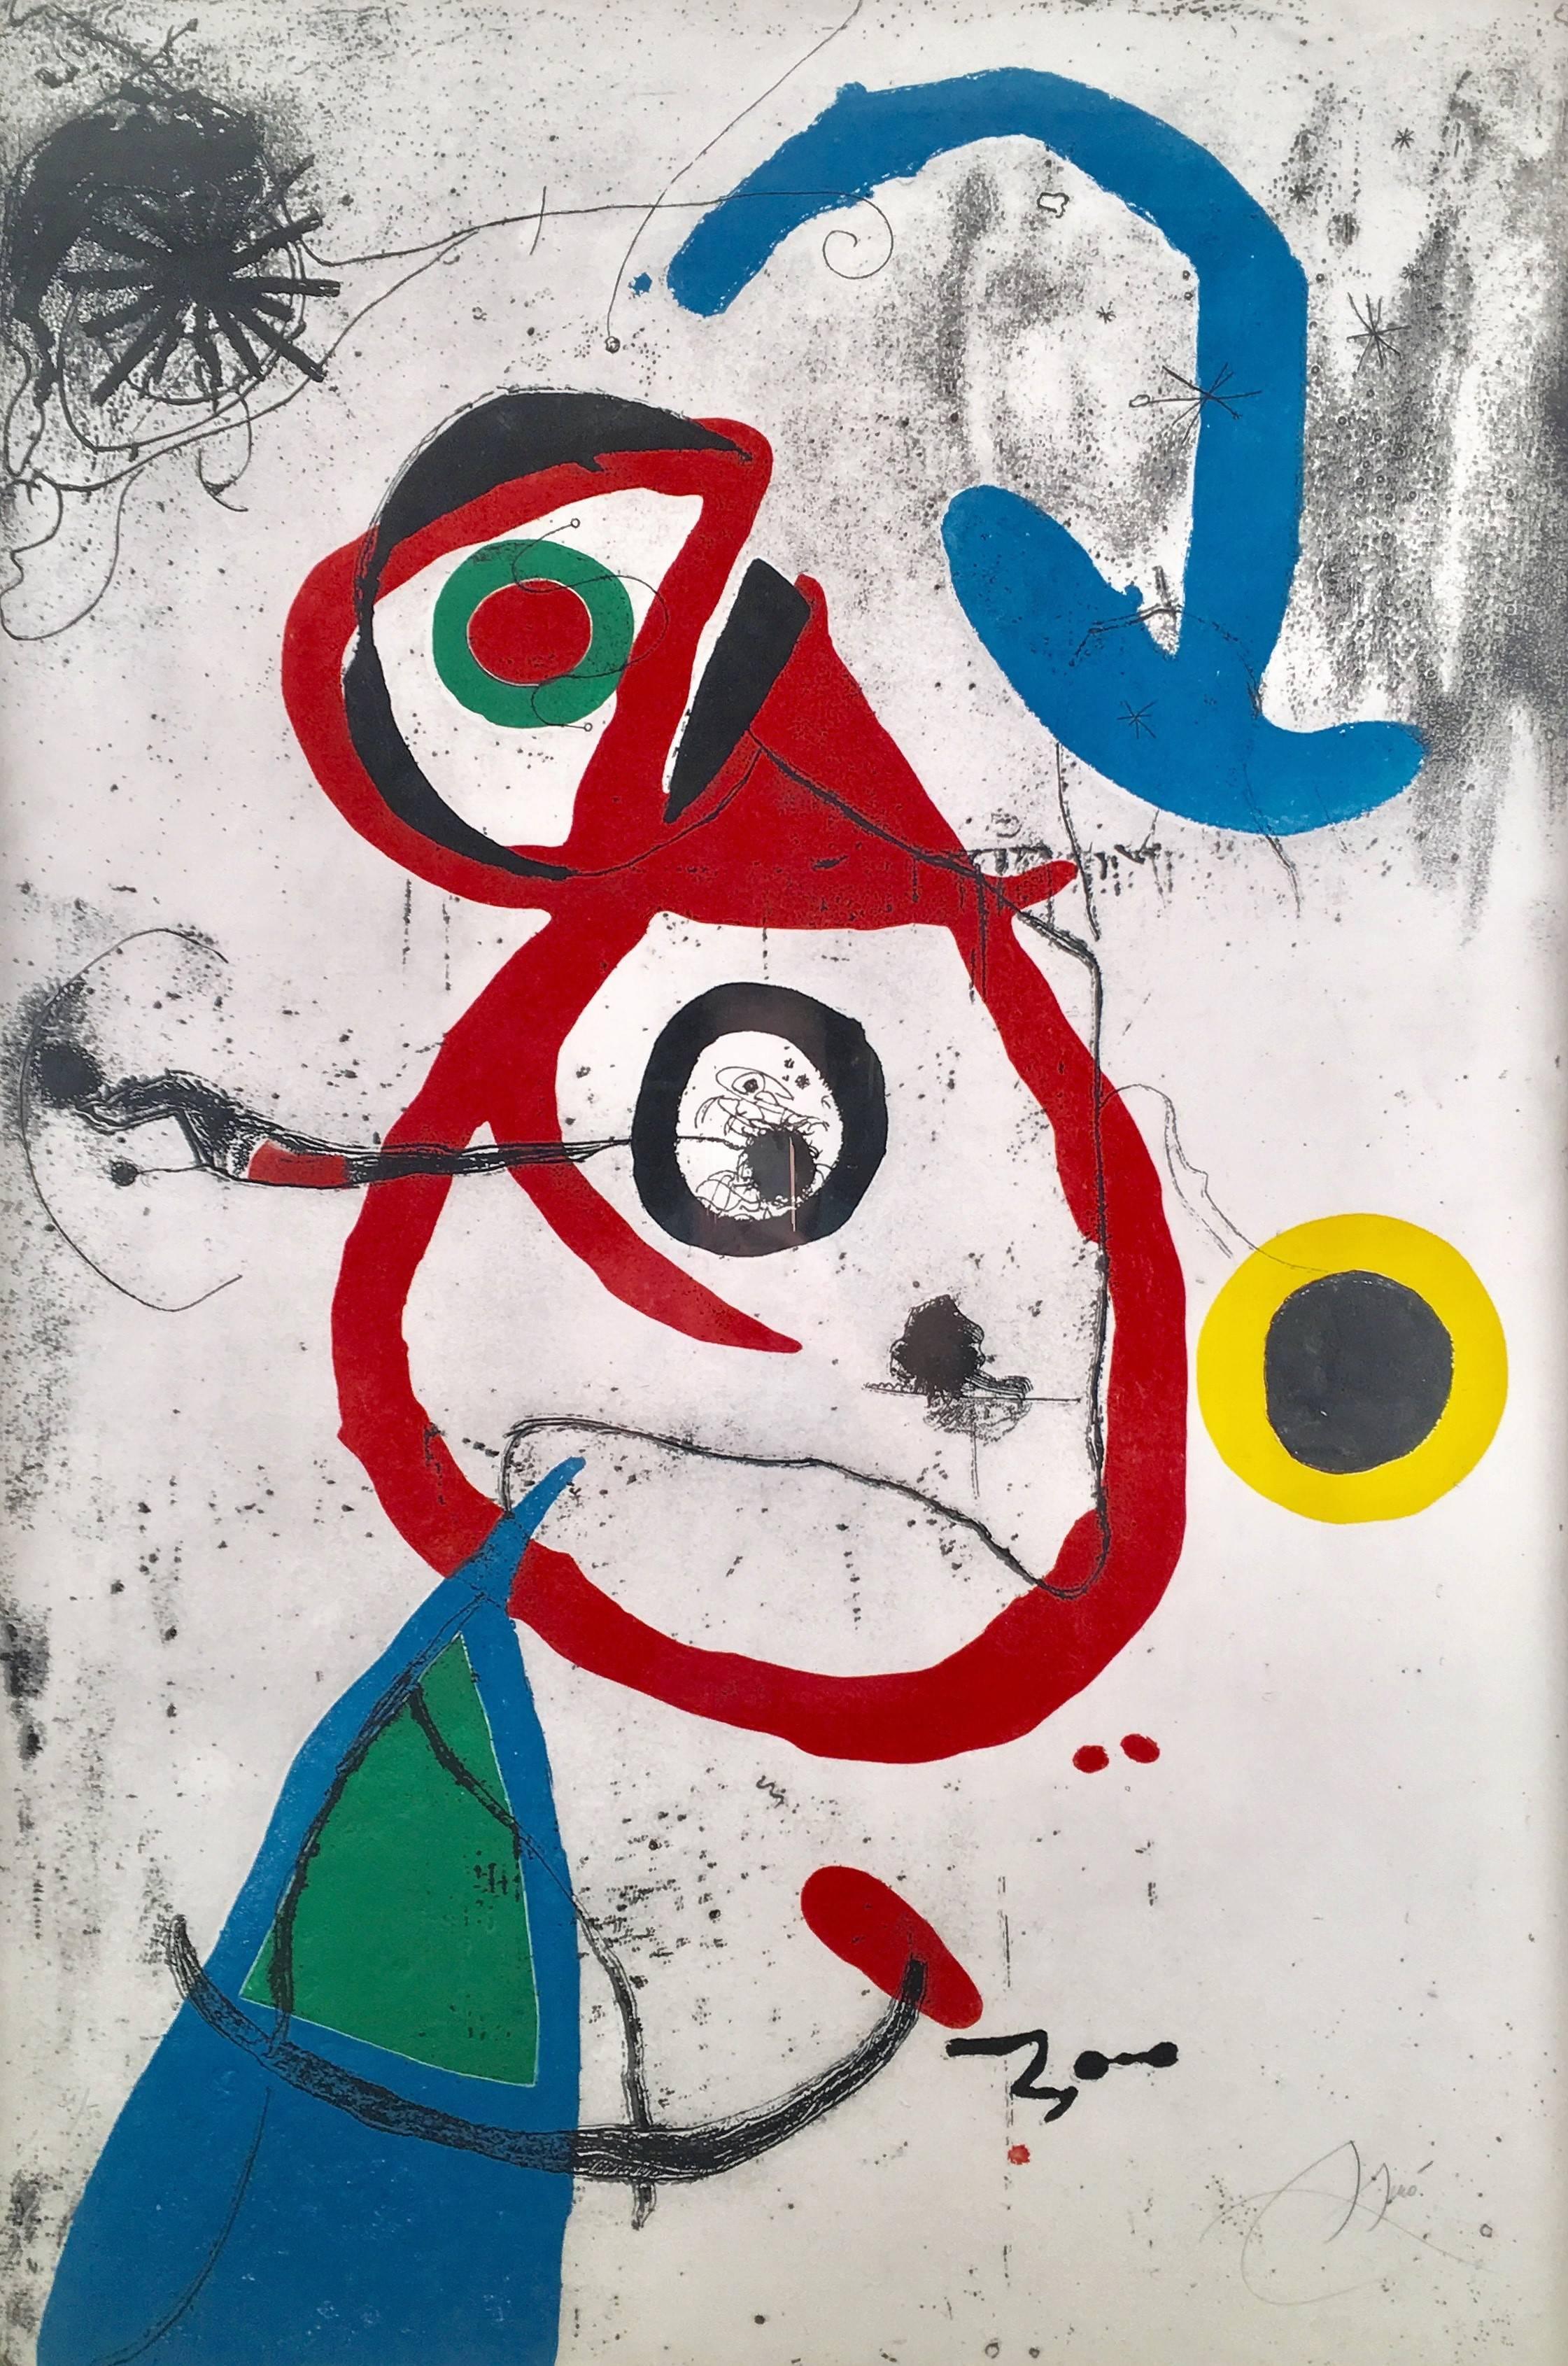 Joan Miró Abstract Print - From the Barcelona Suite D.600